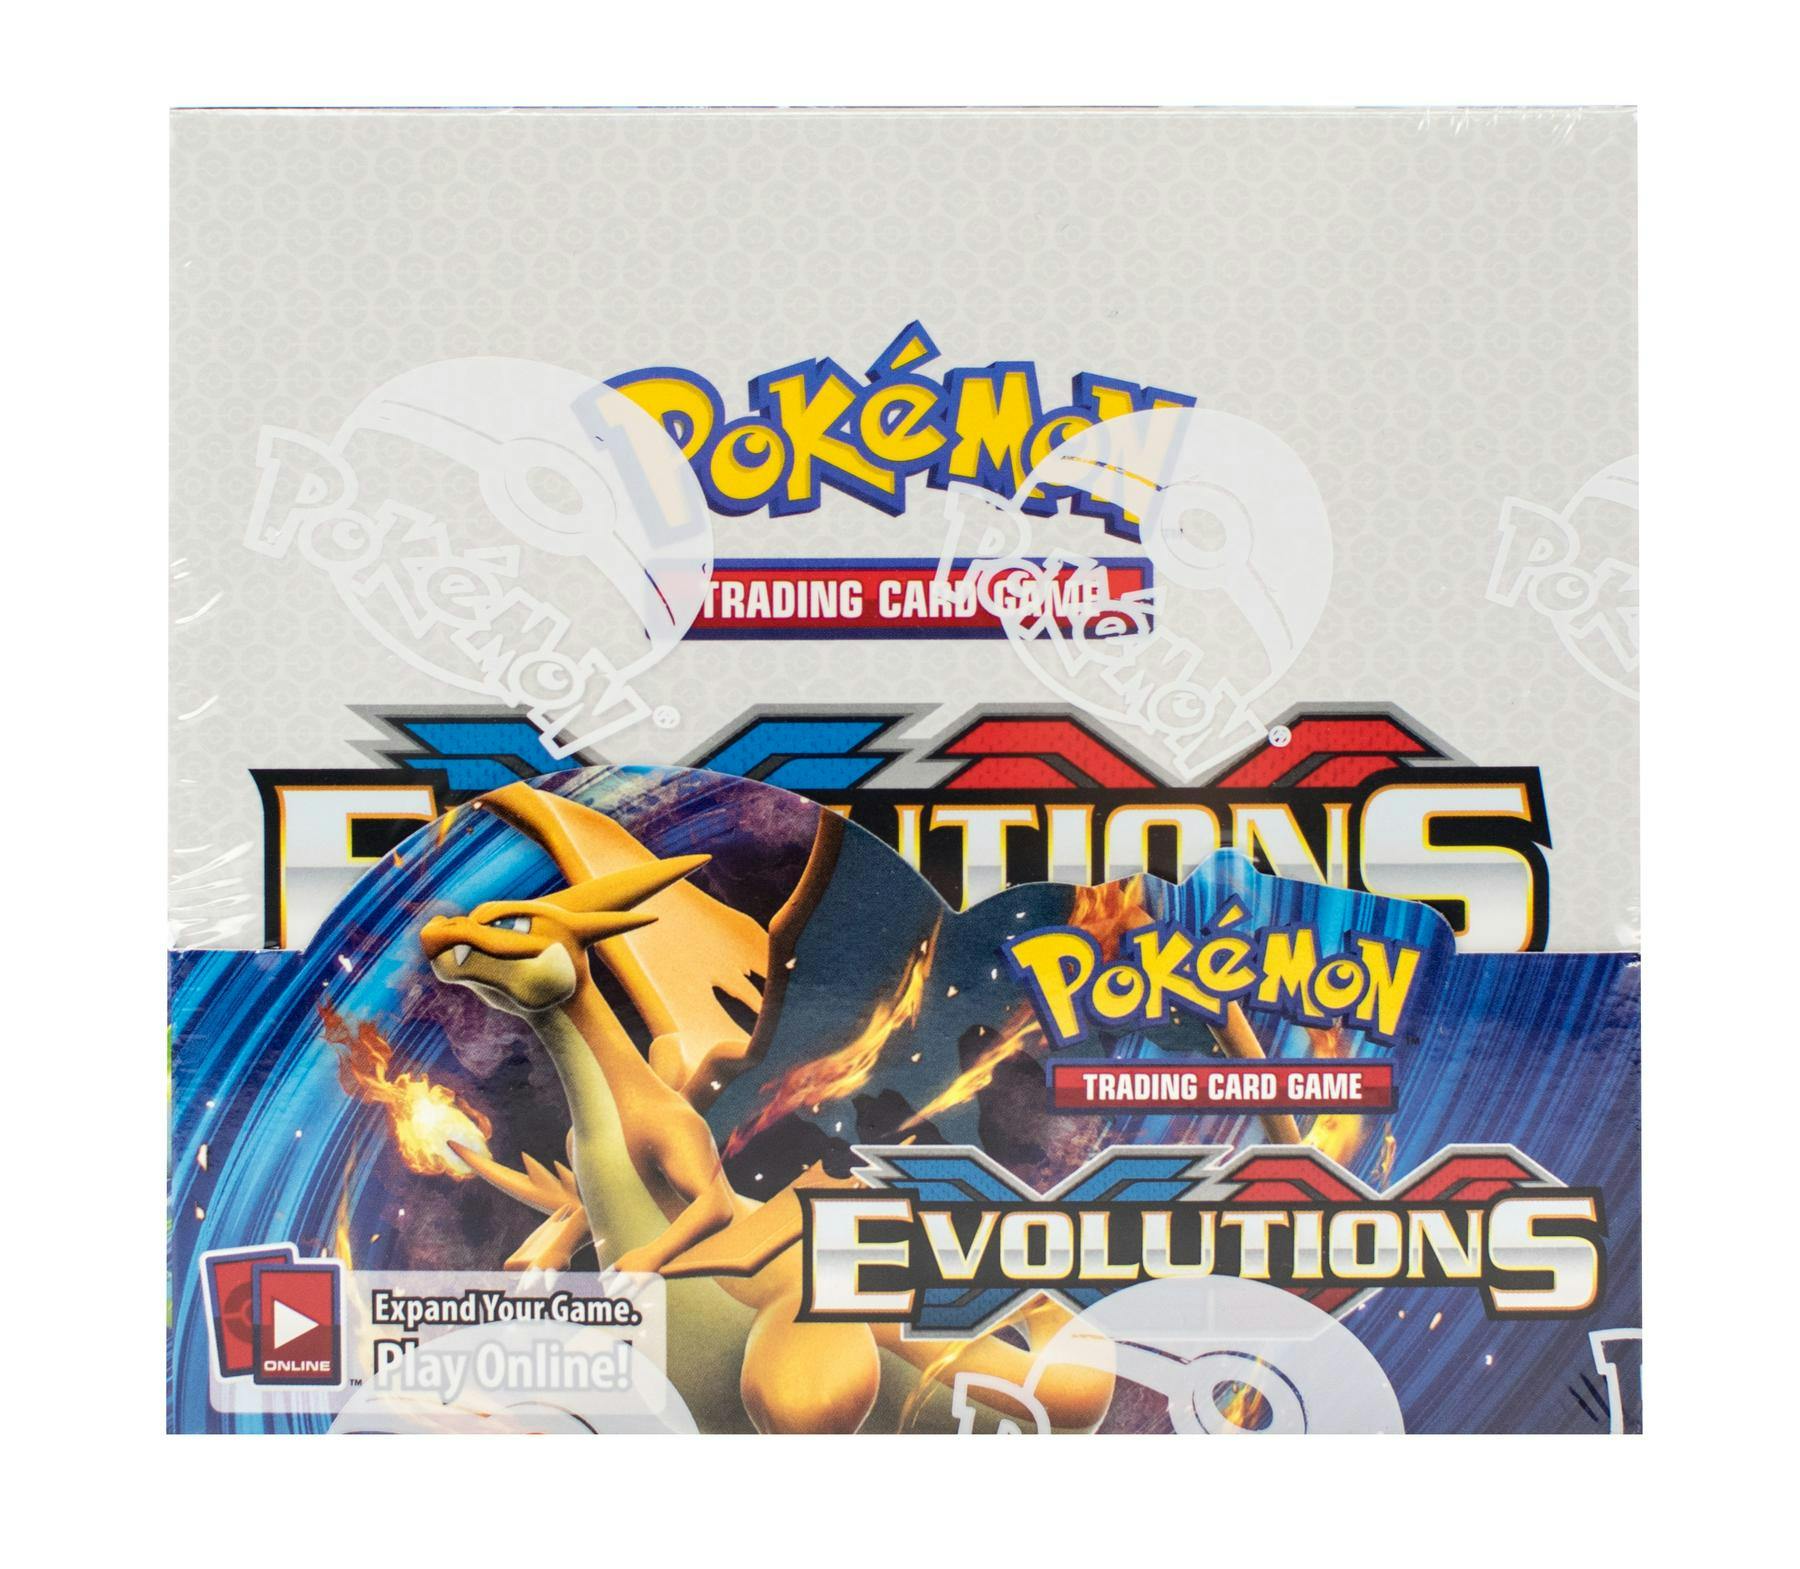 Pokemon TCG: XY Evolutions, A Booster Pack Containing 10 Cards Per Pack  with Over 100 New Cards to Collect